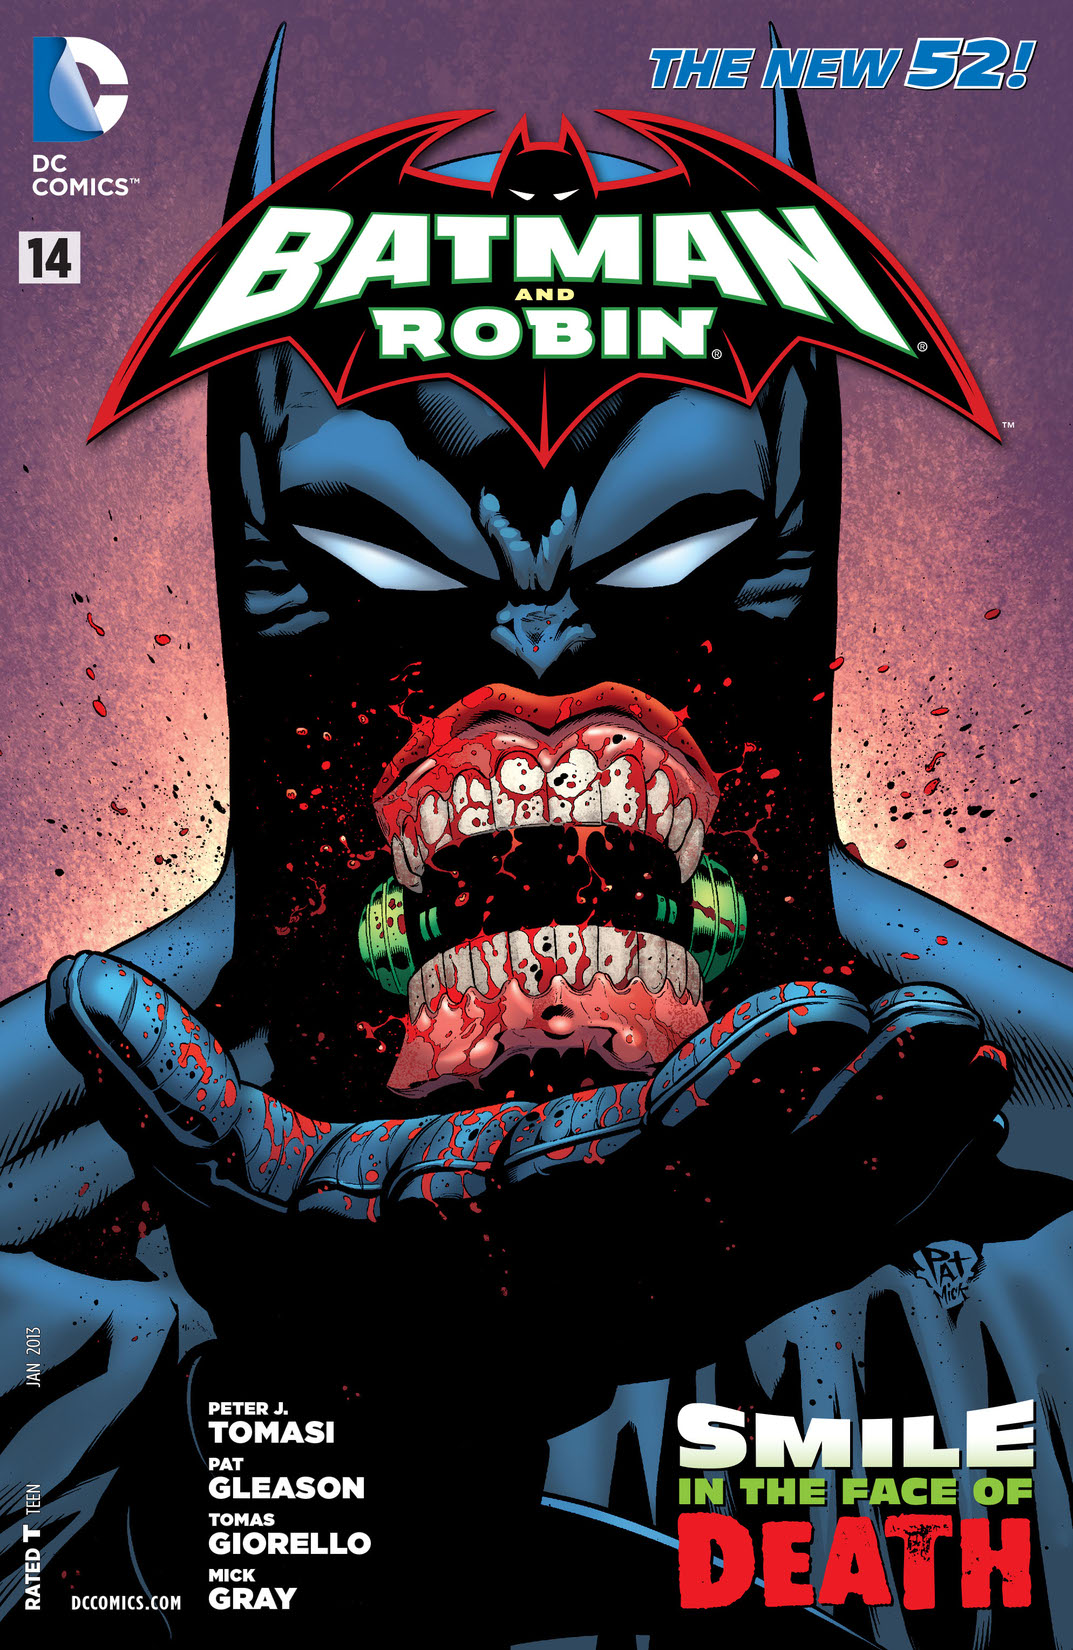 Batman and Robin (2011-) #14 preview images